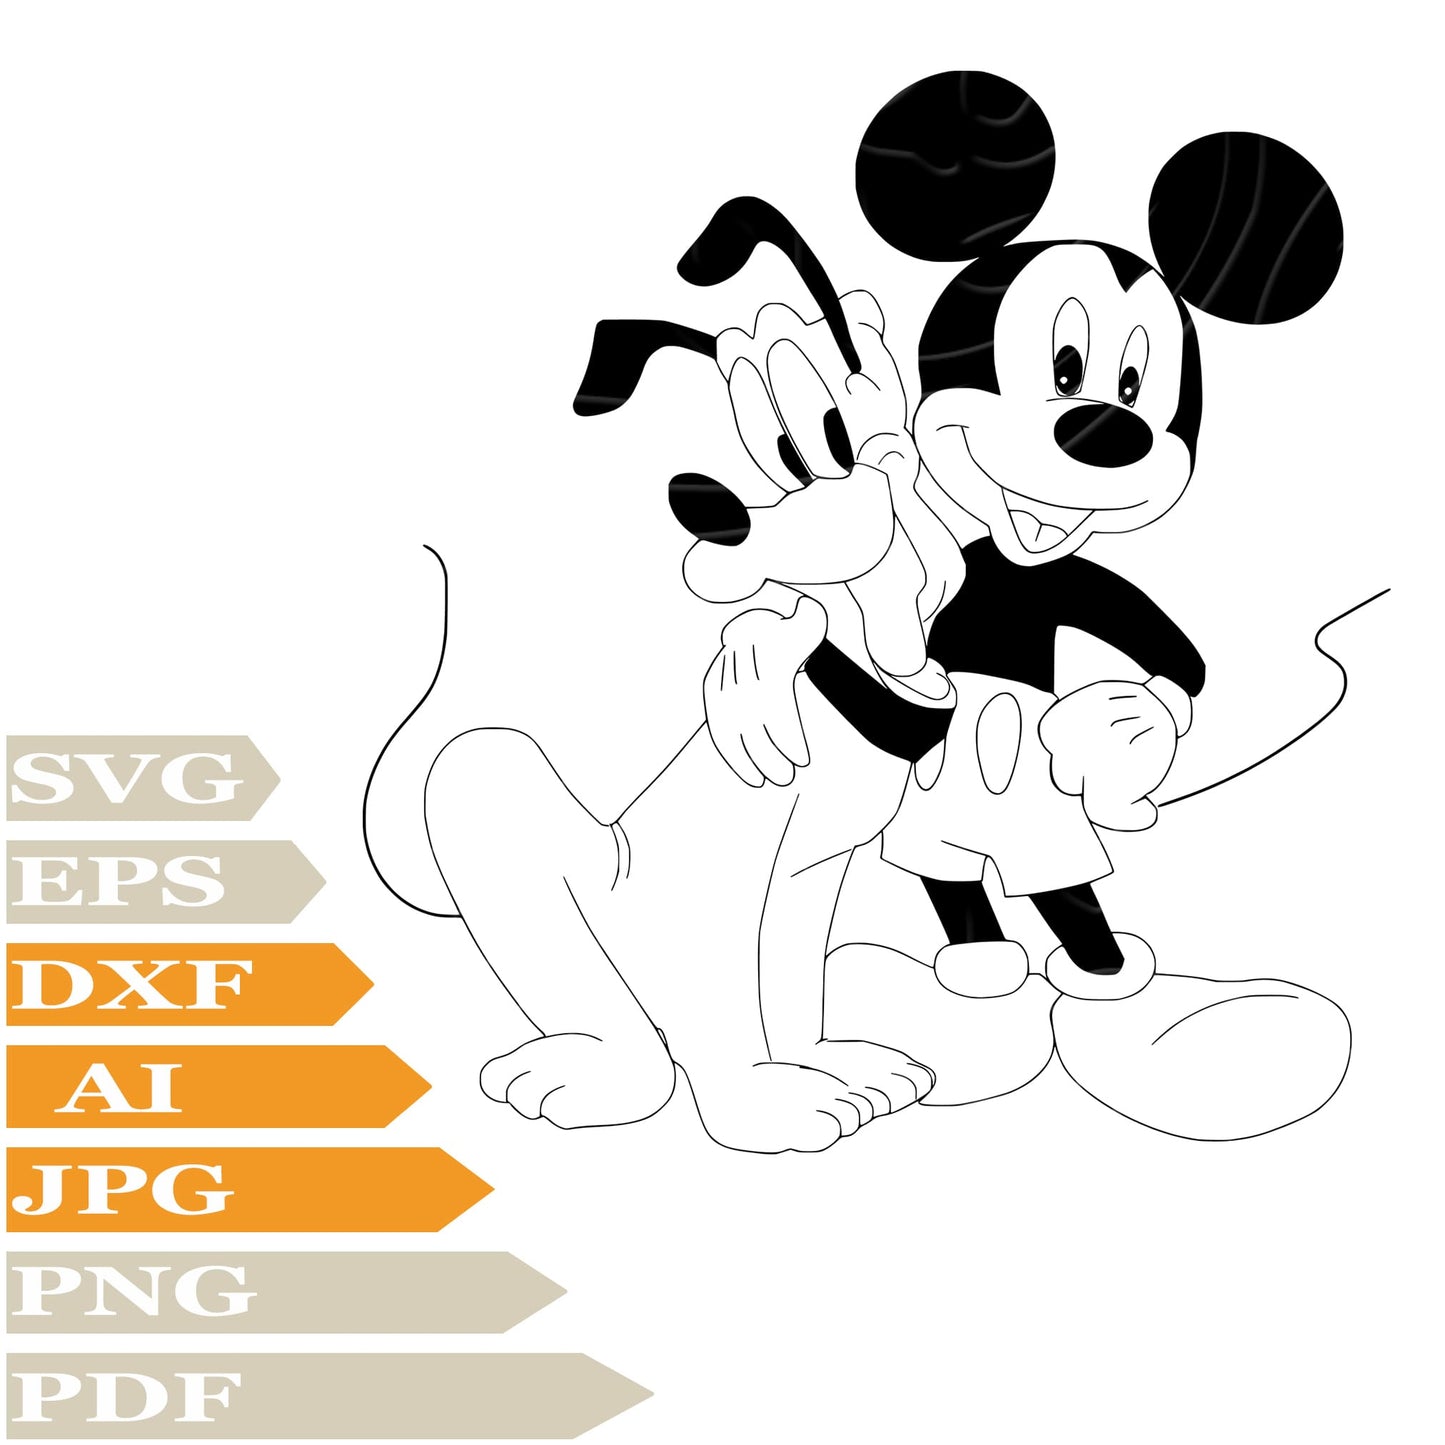 Mickey Mause ﻿SVG, Pluton SVG Design, Mickey Pluto PNG, Mickey Pluto Vector Graphics, Dog Pluto Mickey Mause For Cricut, Digital Instant Download, Clip Art, Cut File, For Shirts, Silhouette